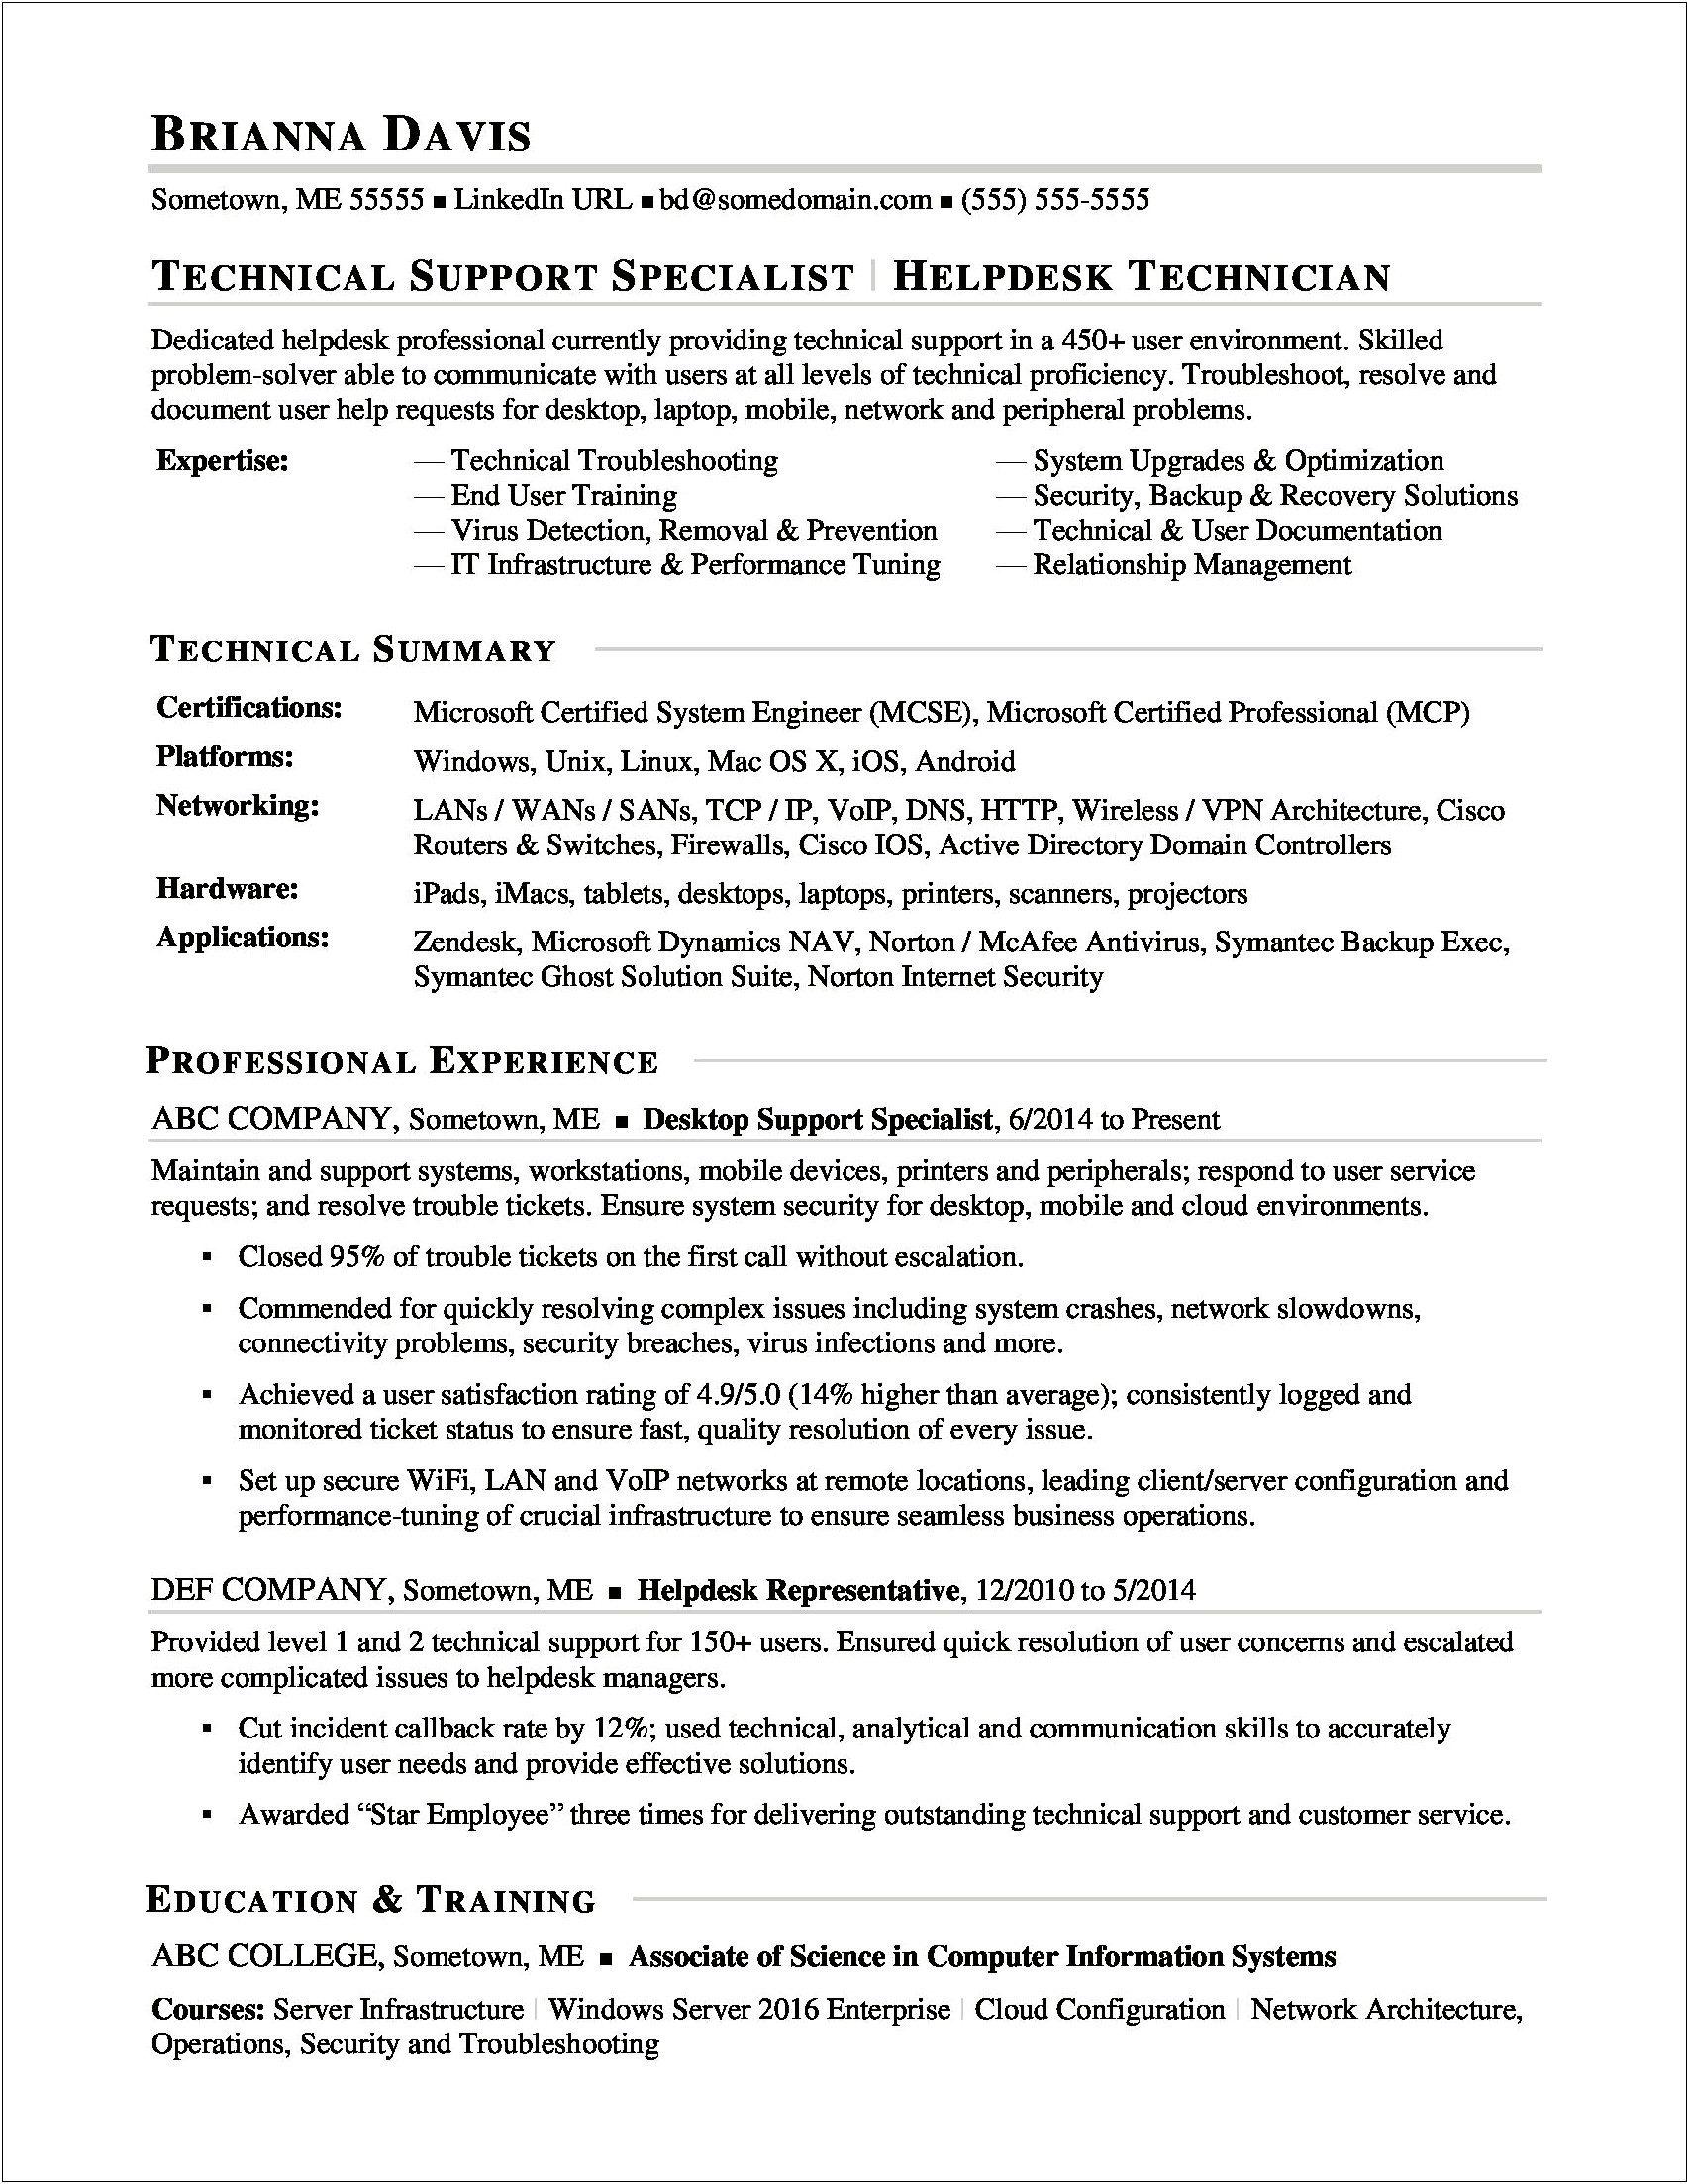 Example Of Professional Summary In Resume